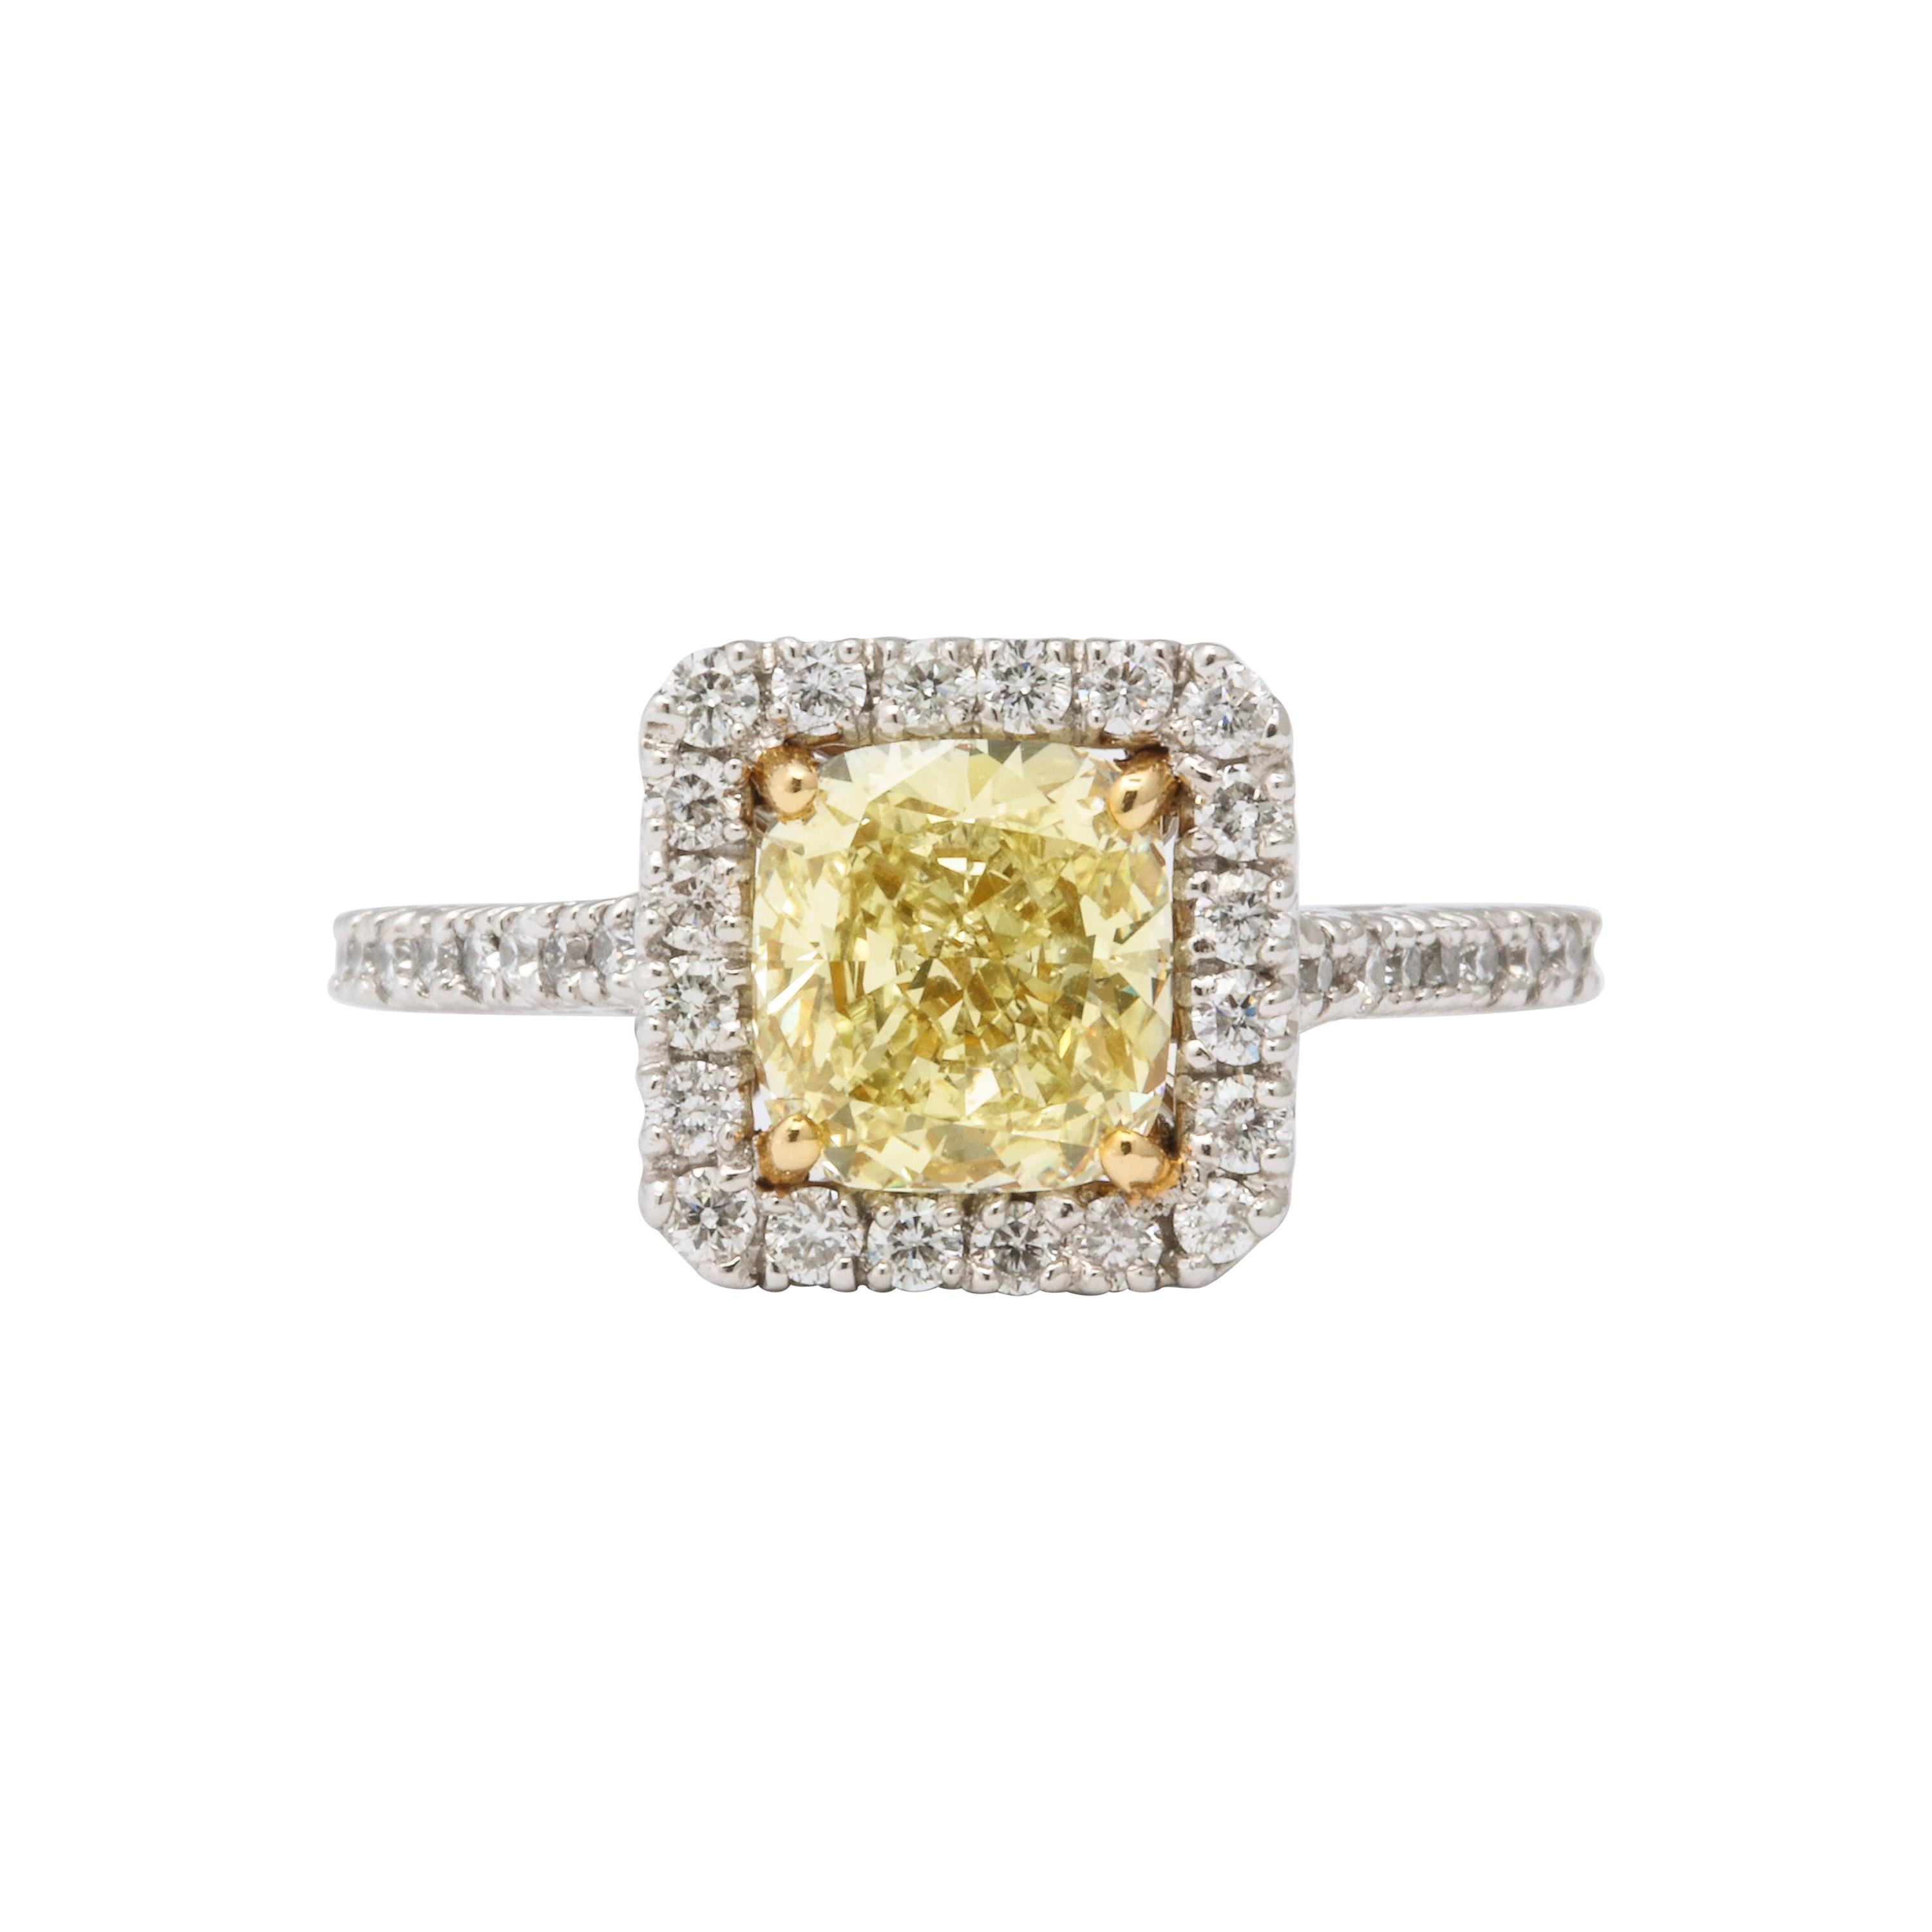 GIA Certified 1.71 Carat Yellow Diamond Engagement Ring For Sale